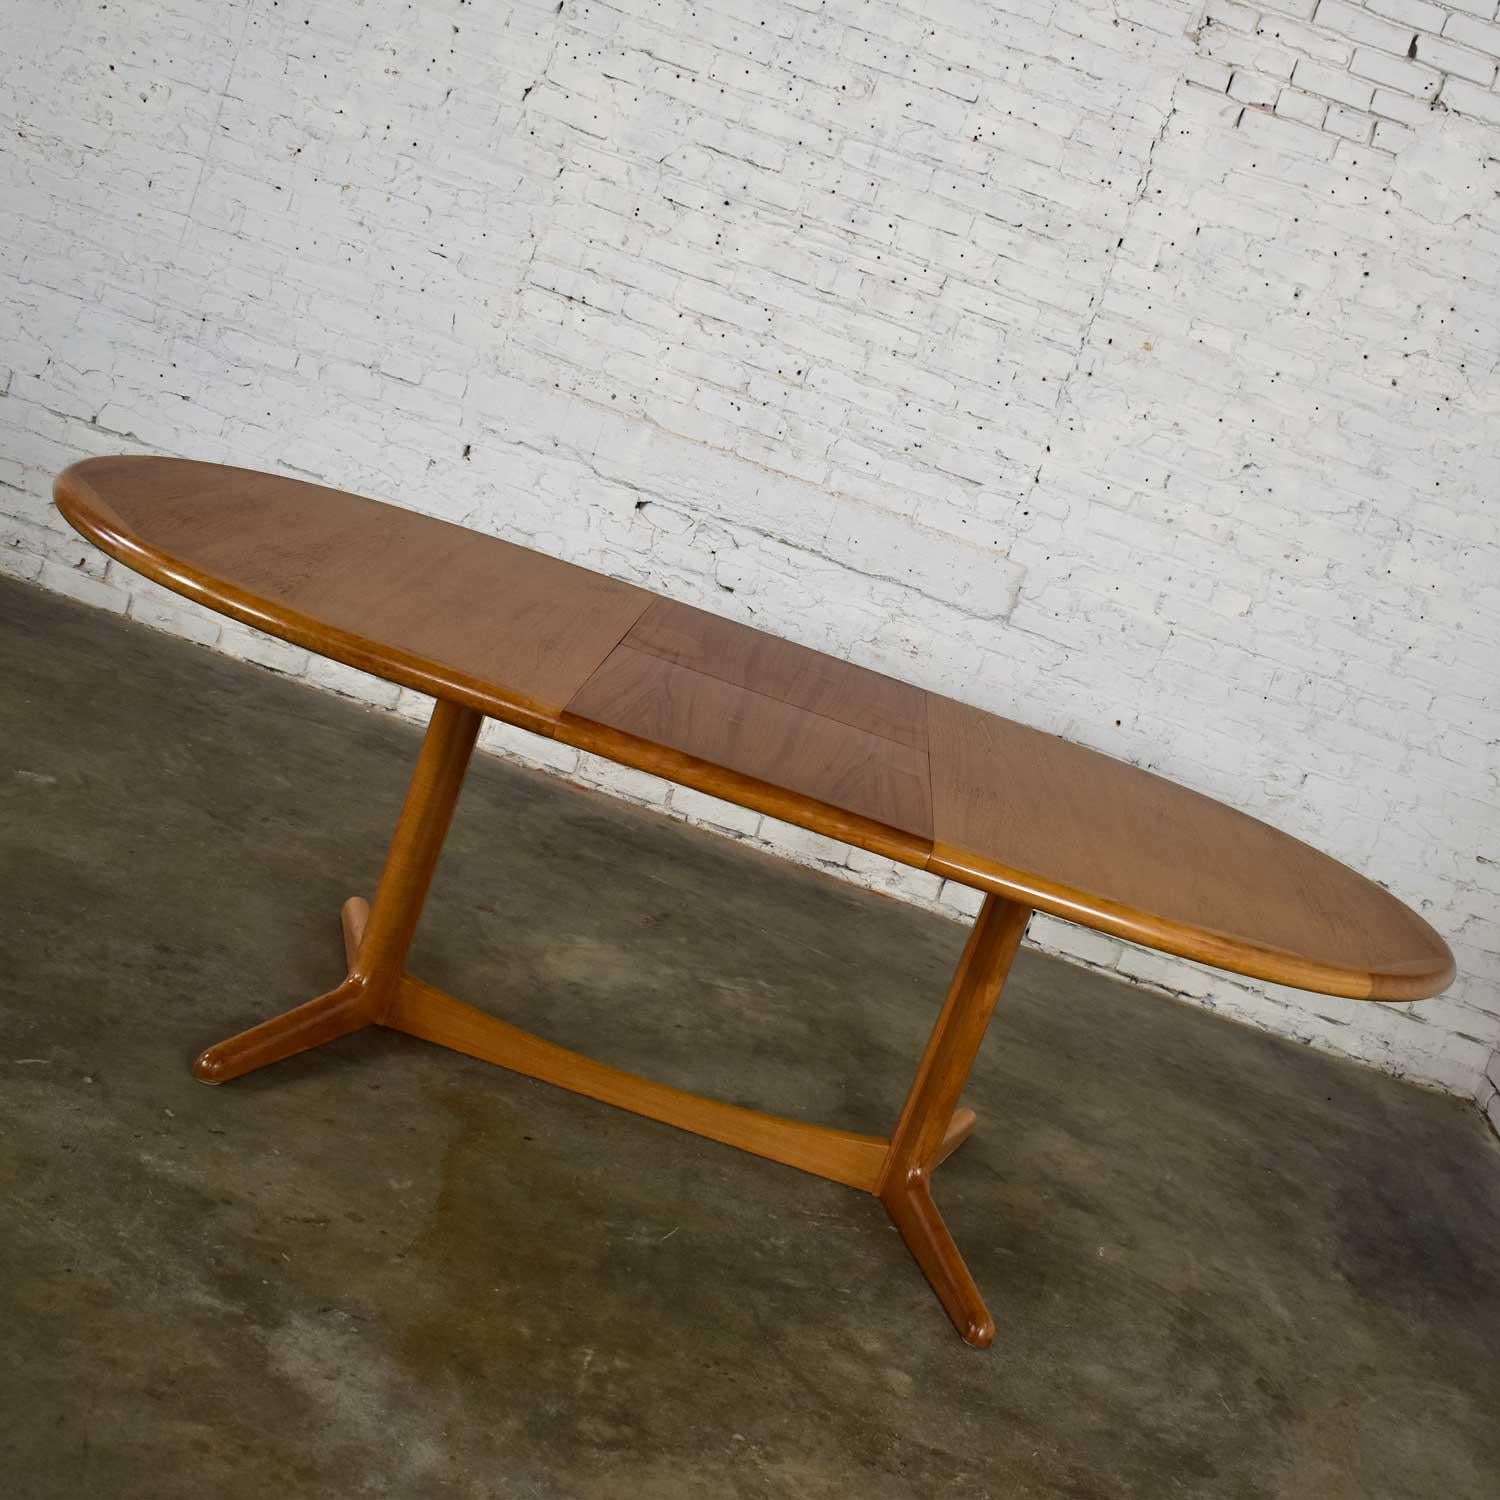 Handsome Scandinavian Modern oval expanding dining table in solid teak and teak veneer with hidden integral leaf in the style of Dyrlund. Excellent vintage condition other than there is some slight bubbling in the veneer of the leaf and on some of